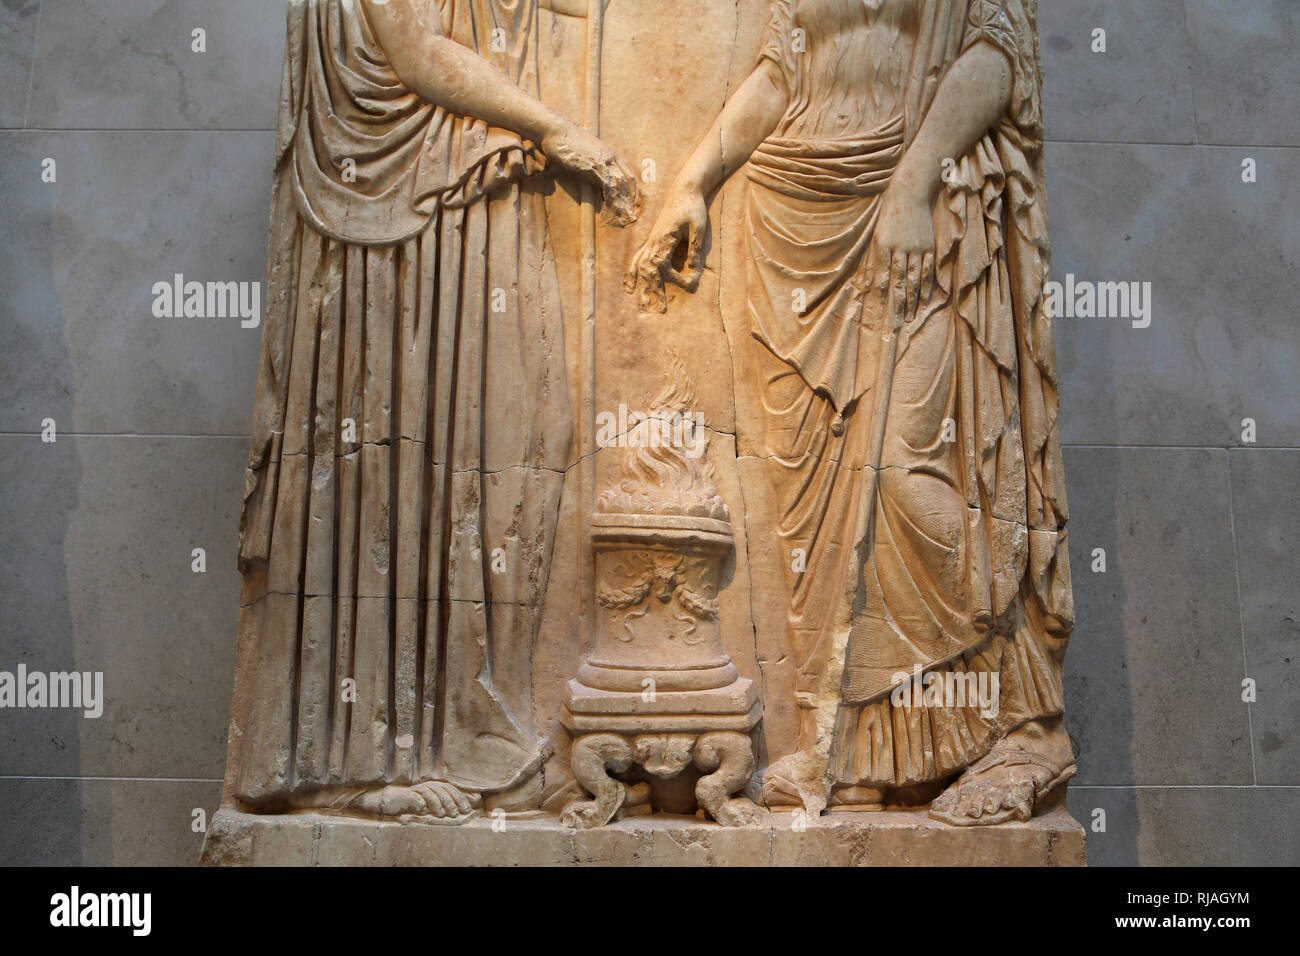 Relief with 2 goddesses. Roman, imperial era. 1st-2nd cent. Altarlike incense burner. Copy of a Greek original. The Met, NY, USA Stock Photo